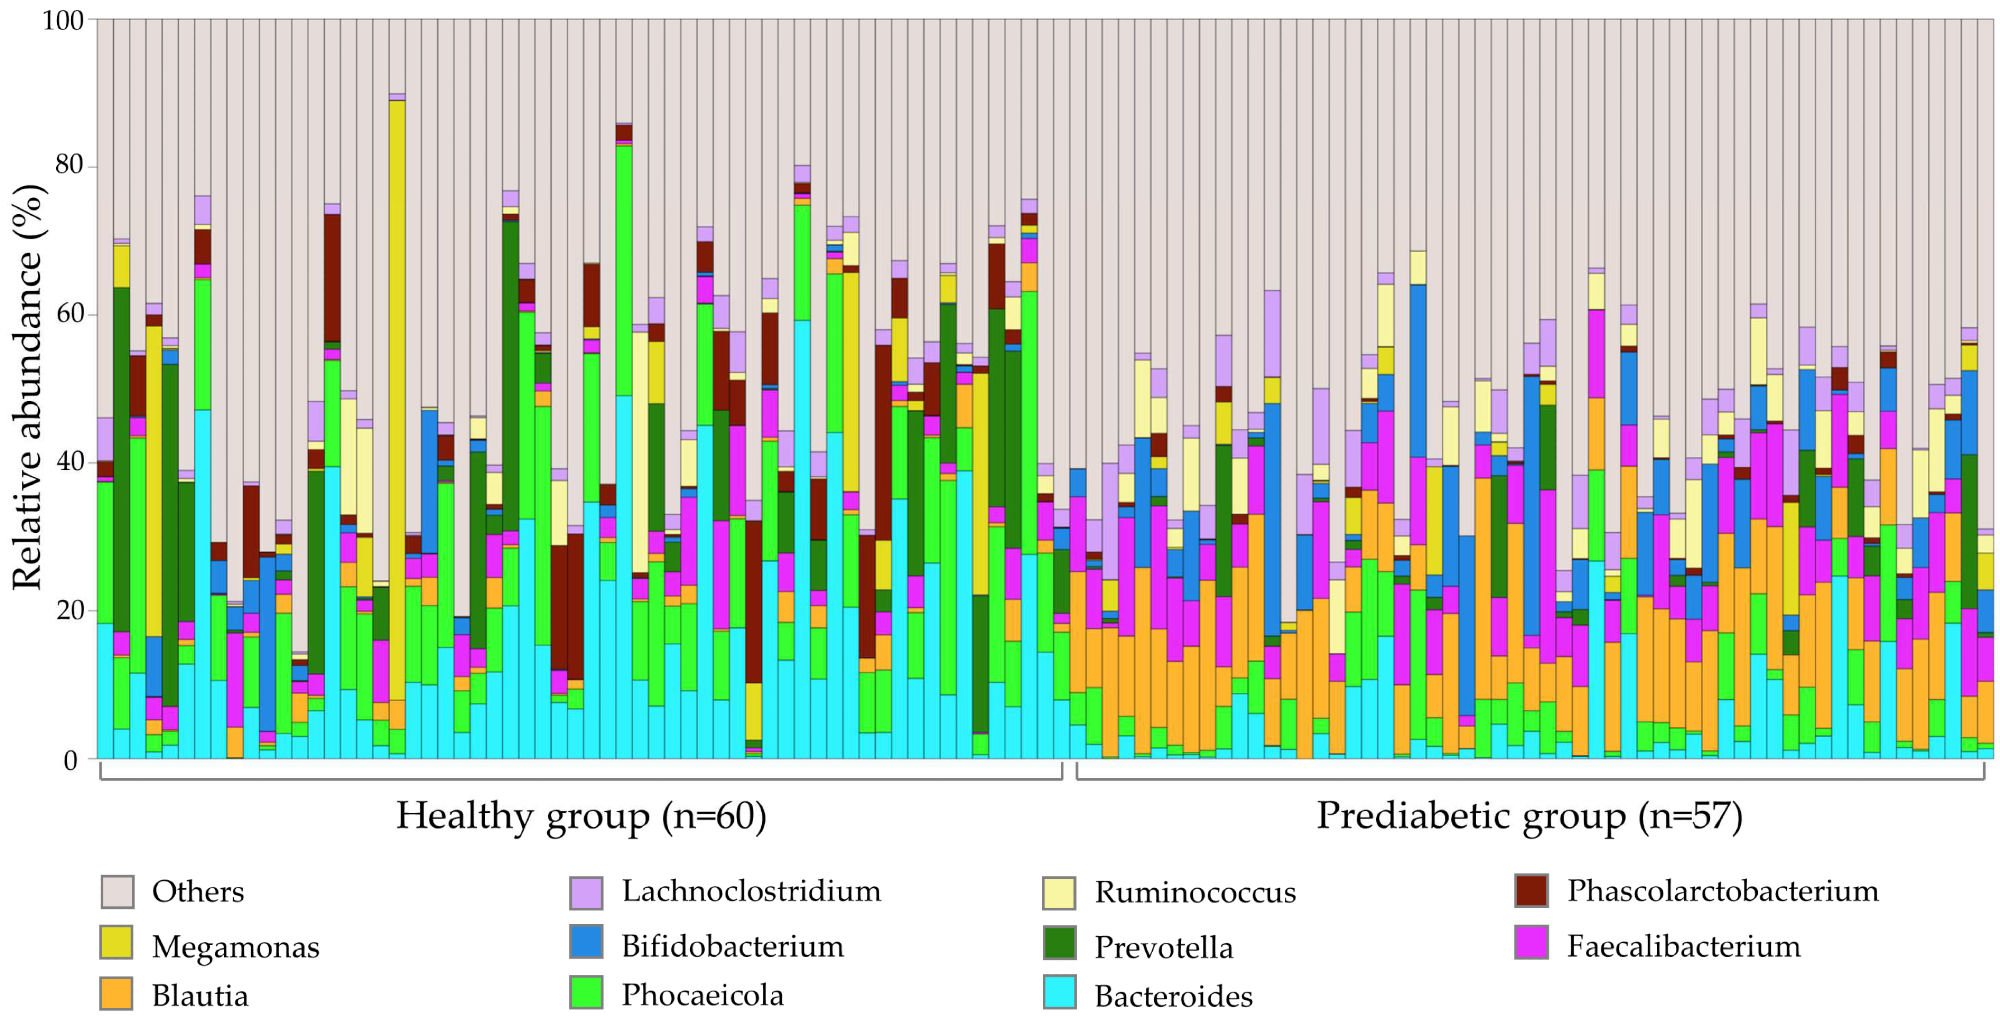 Gut microbiome profile of 117 fecal samples at the genus level. The remaining bacterial genera are summed as ‘Others’.